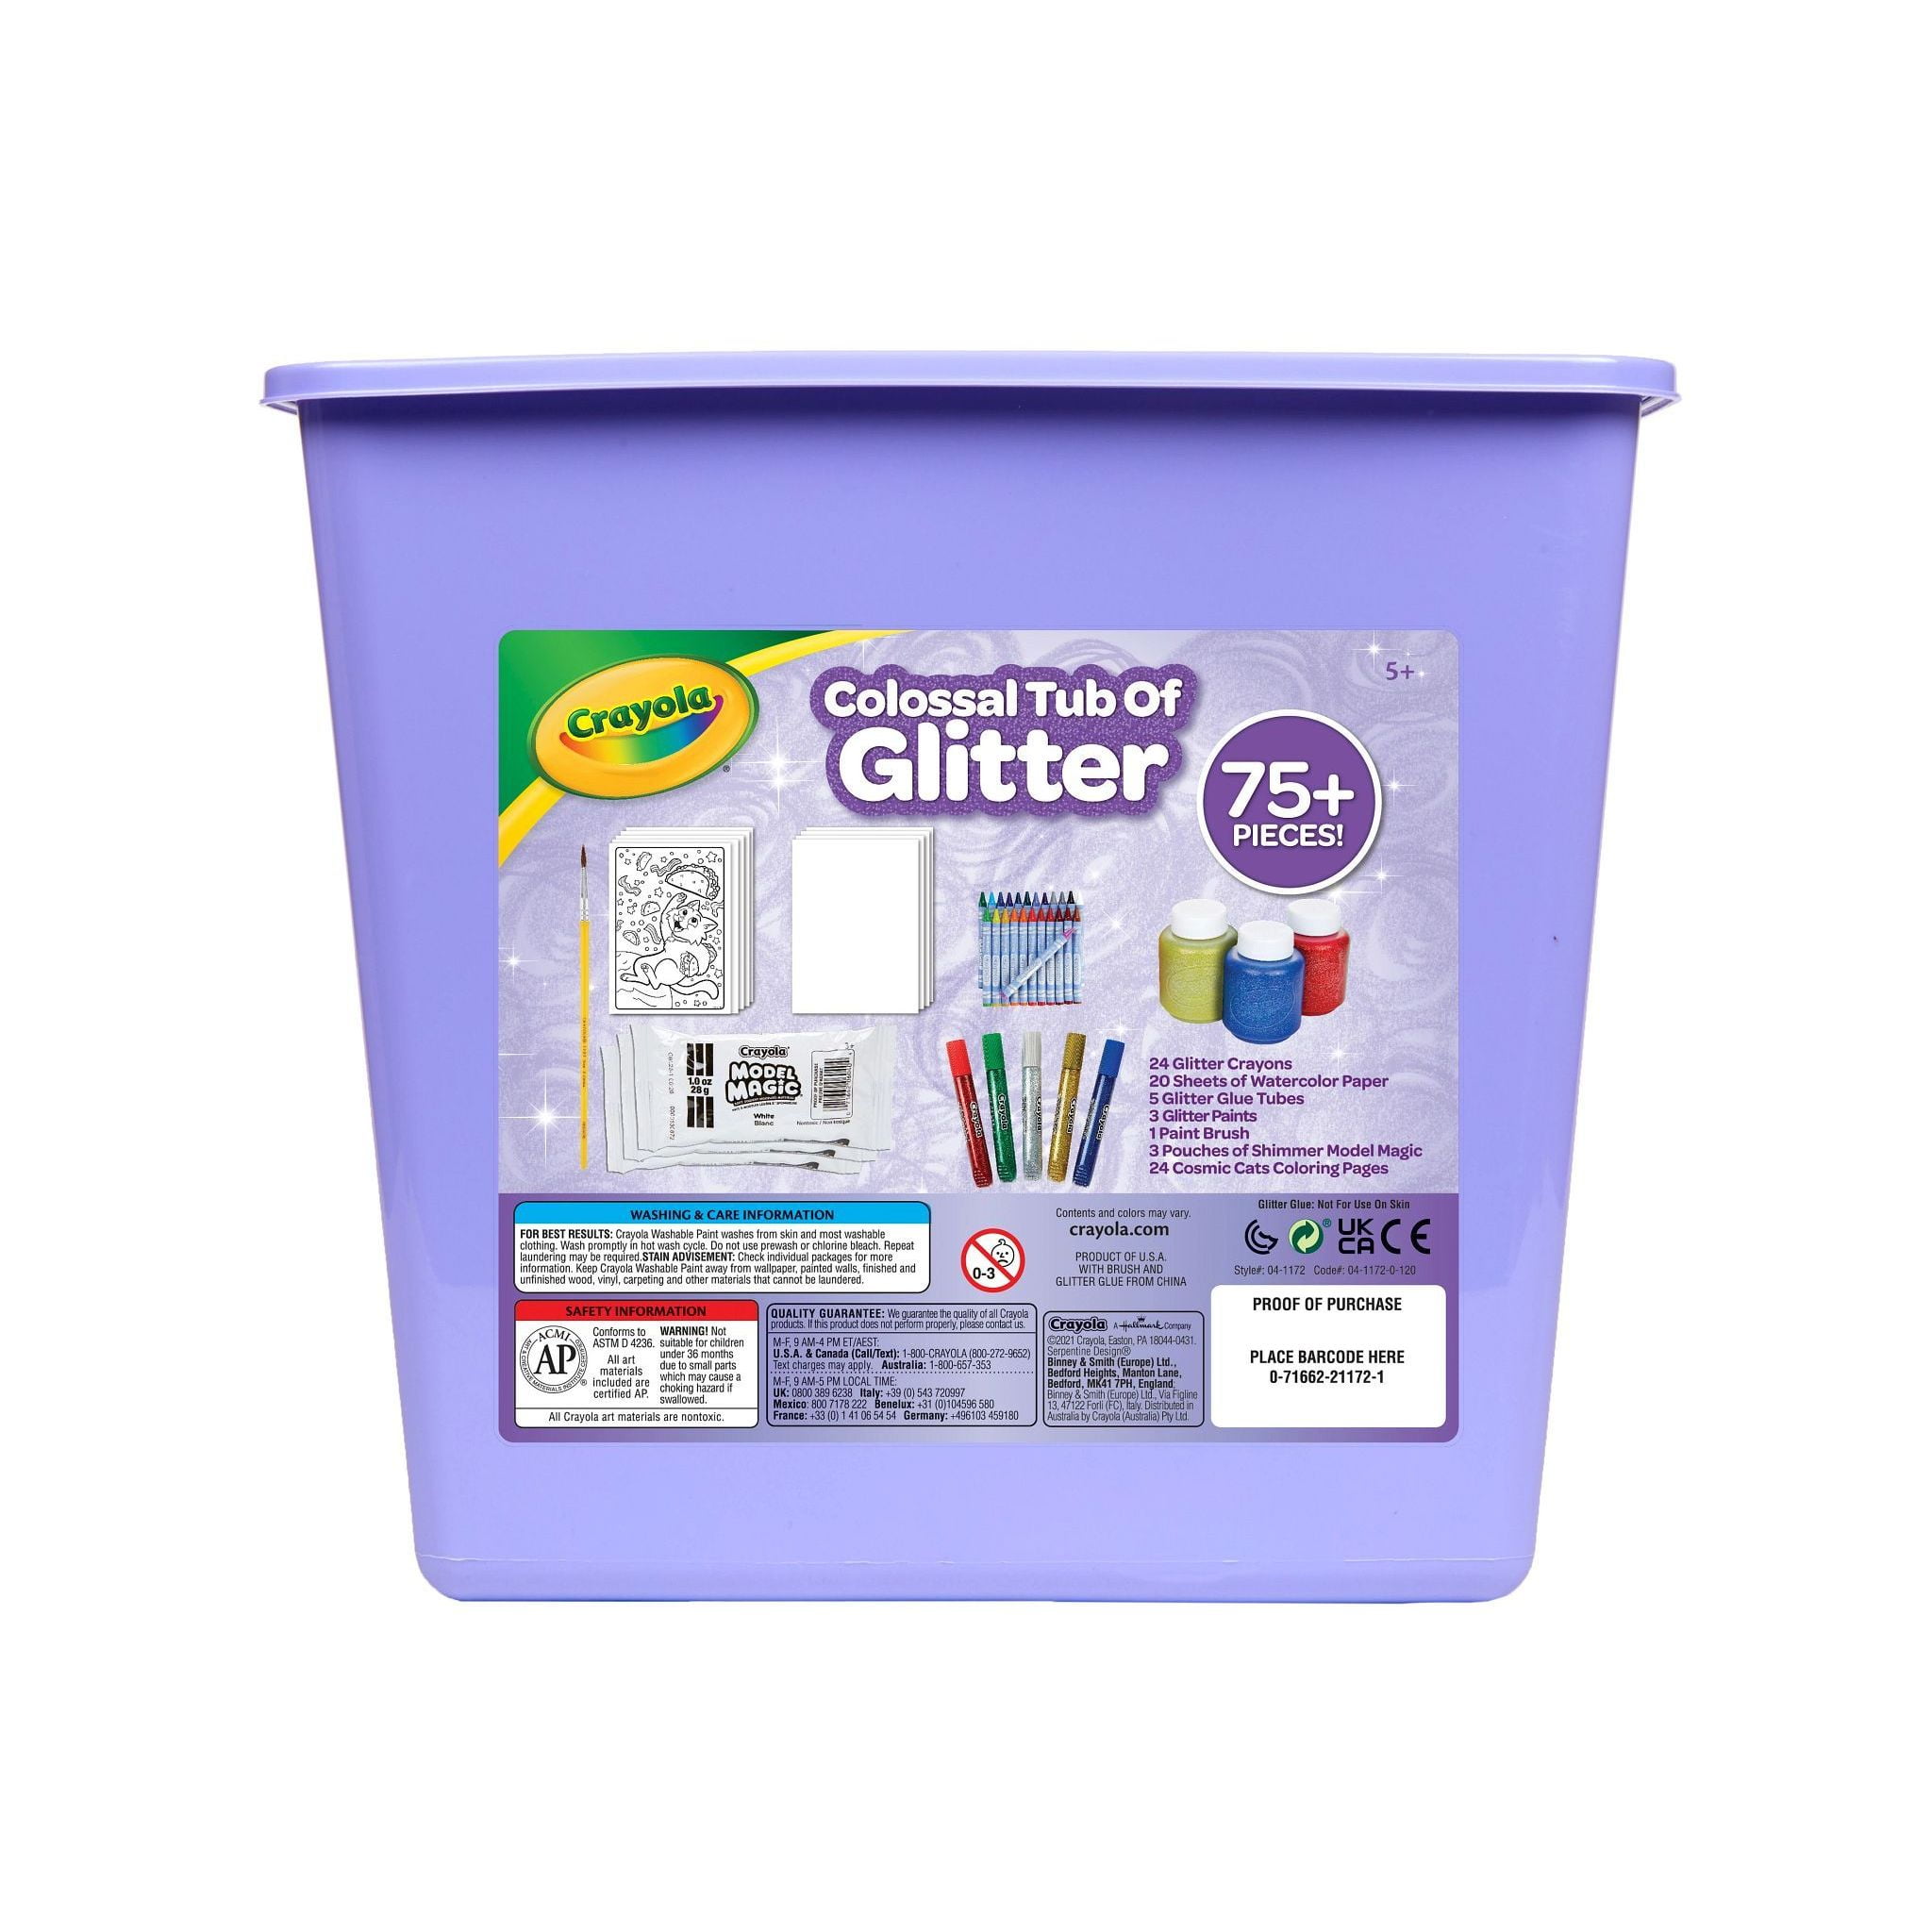 3cm Square Plastic Mold – The Crafts and Glitter Shop